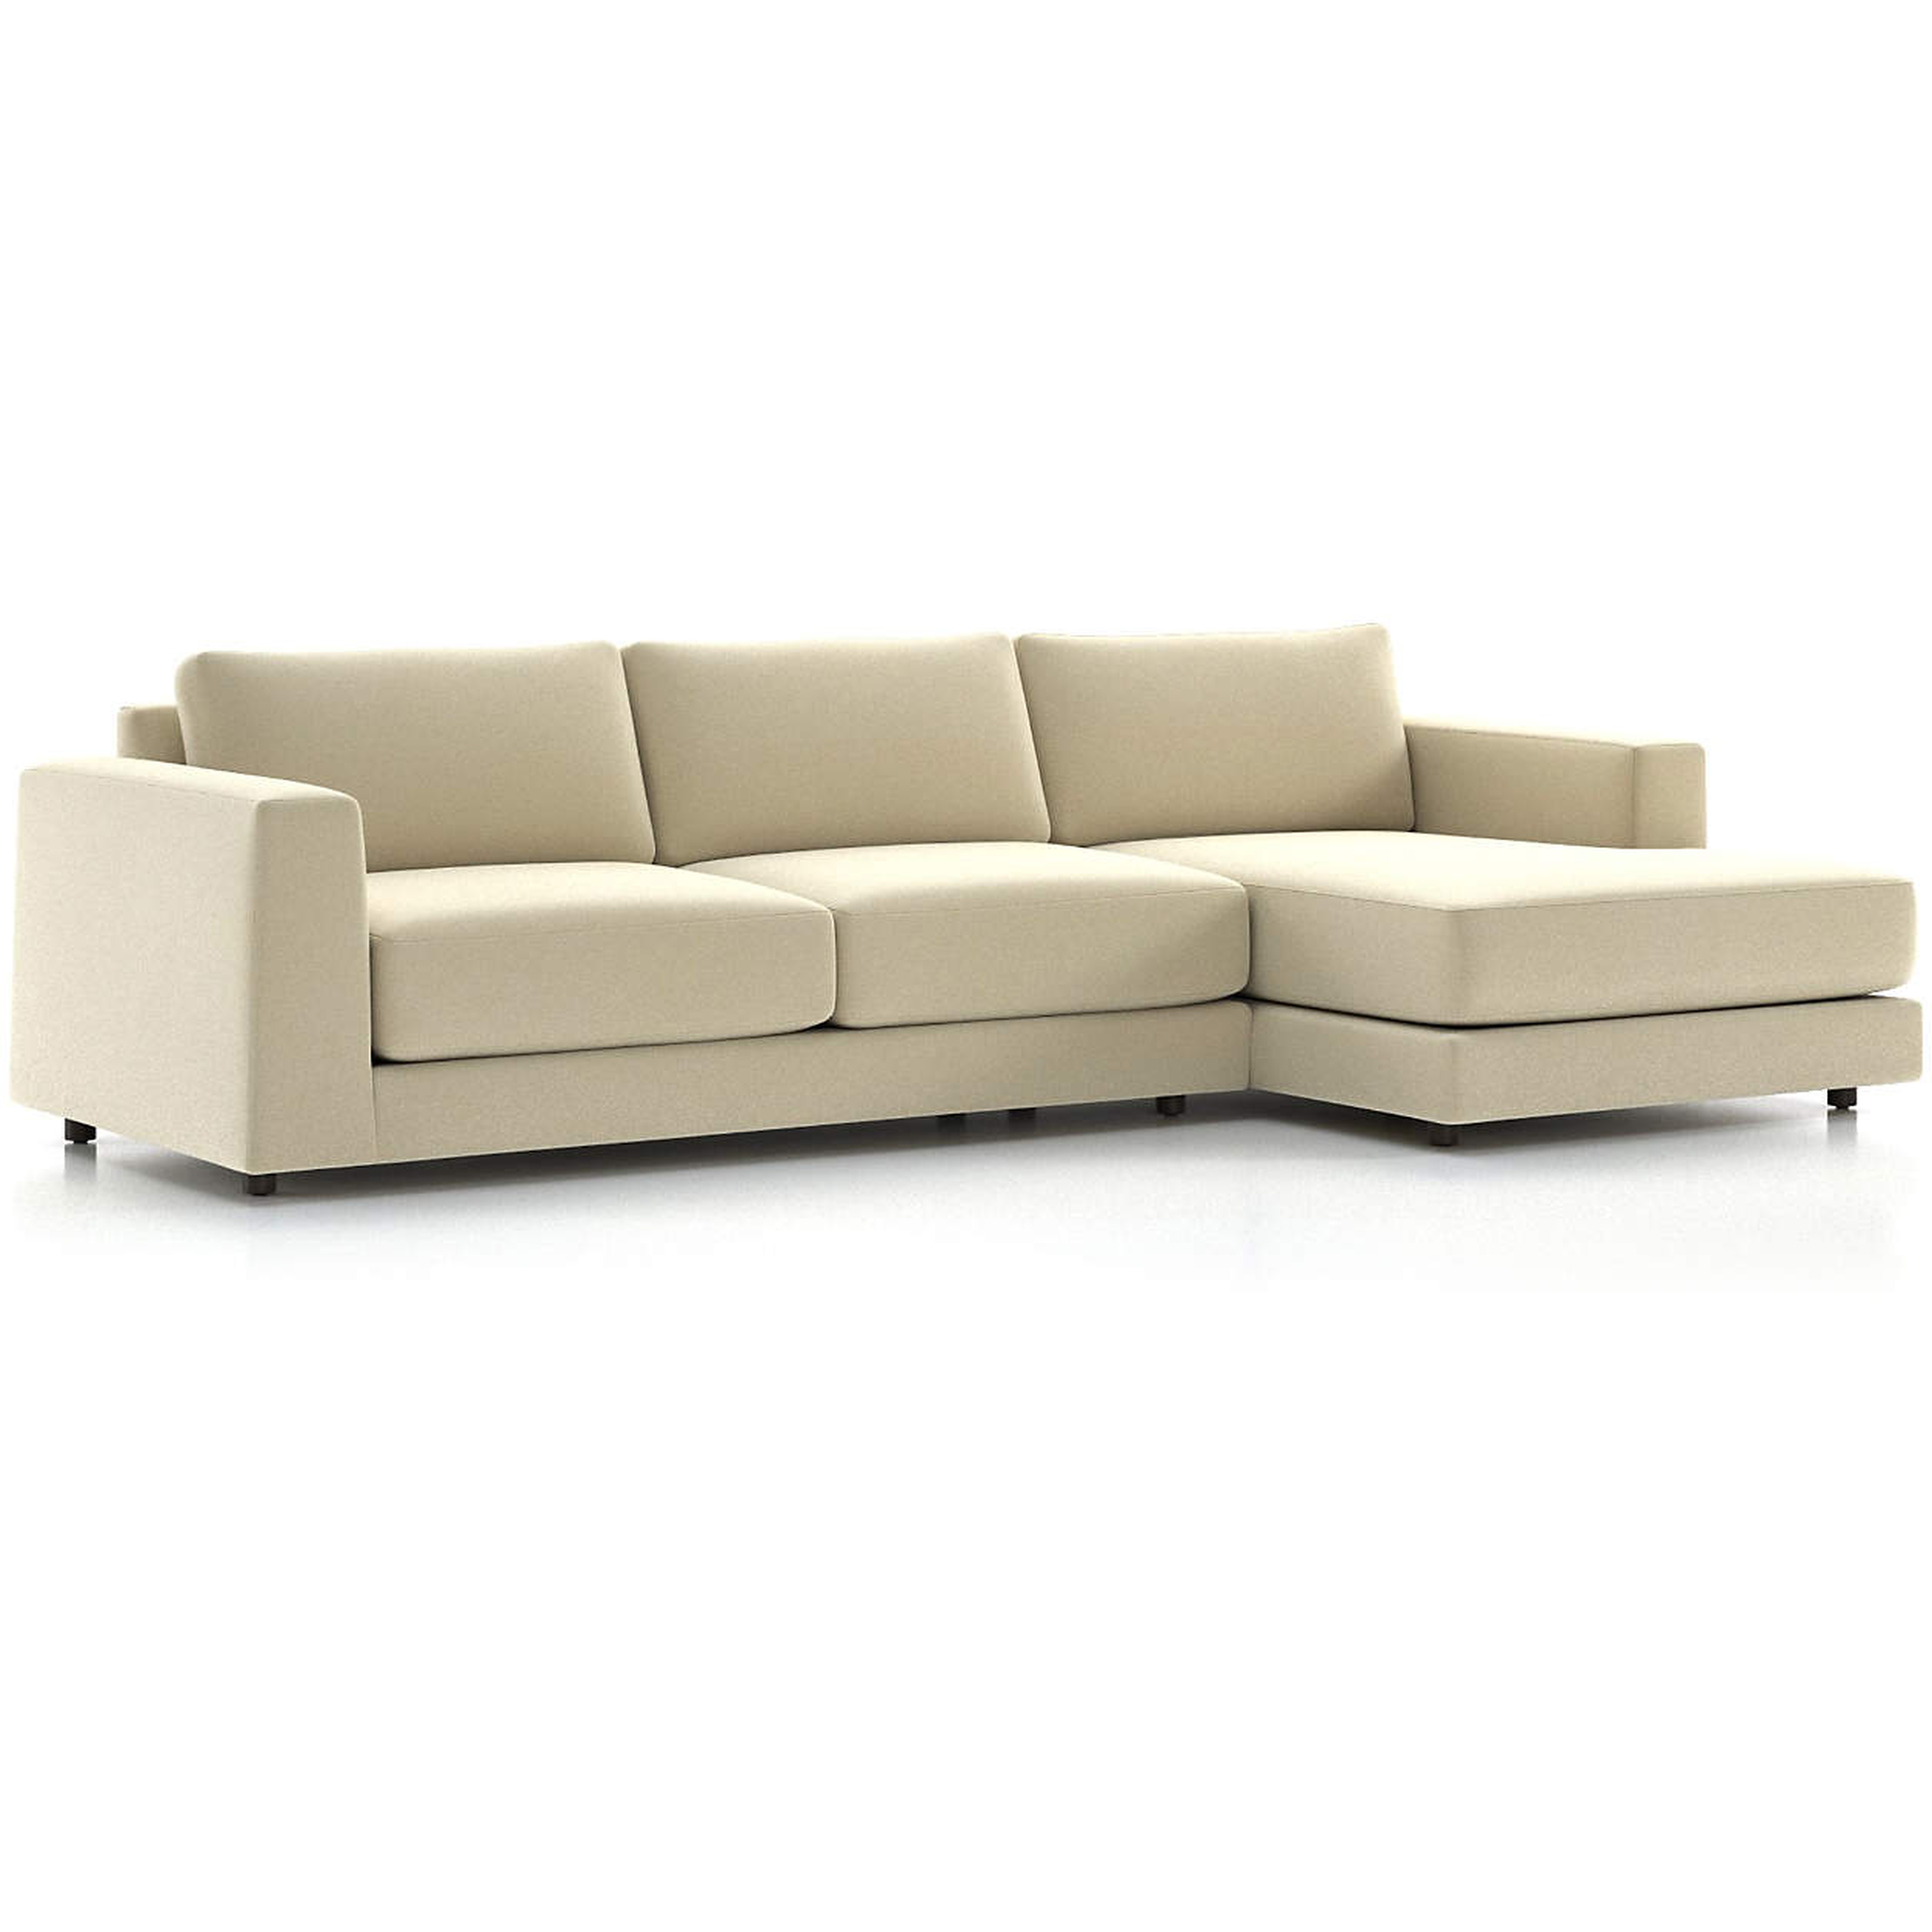 Peyton 2-Piece Sectional - Van Gogh, Oyster - Crate and Barrel